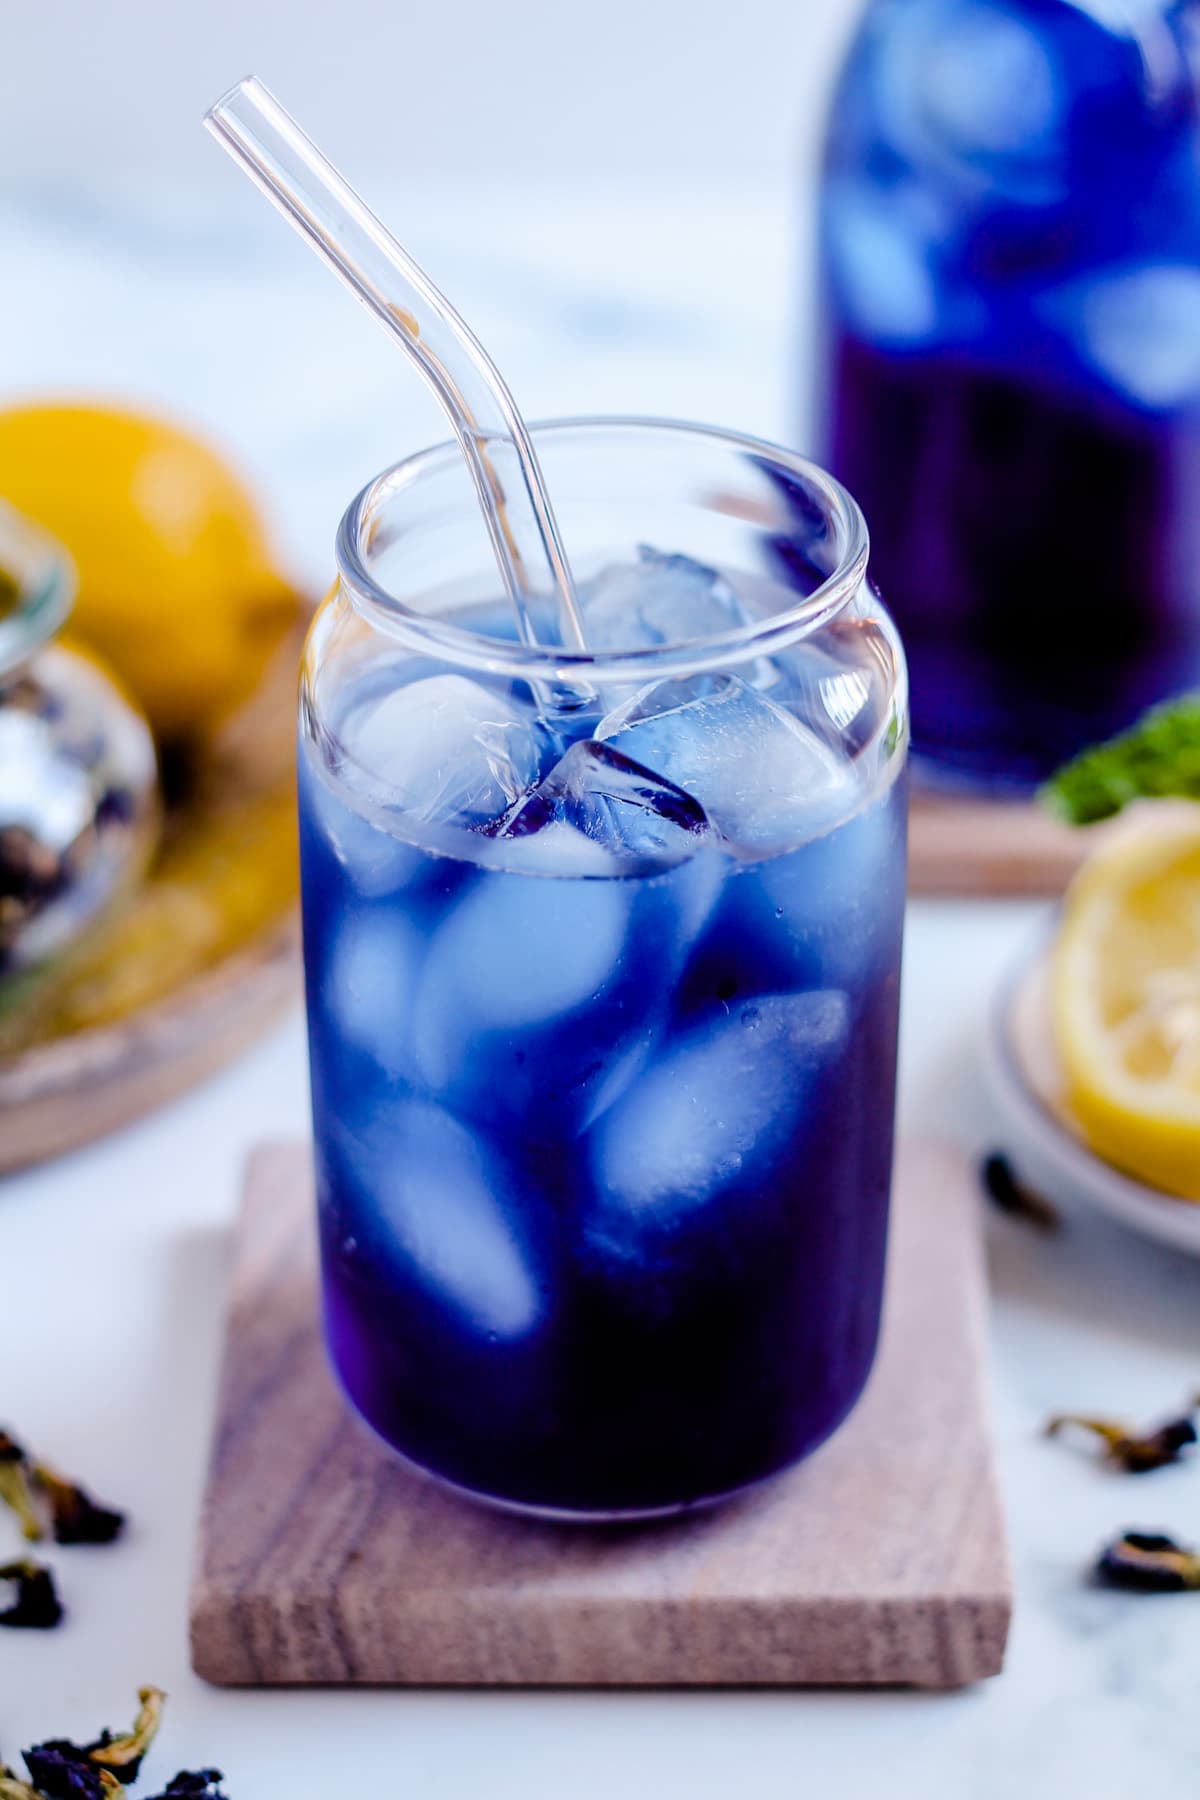 A glass with a brilliant blue drink in it over ice.